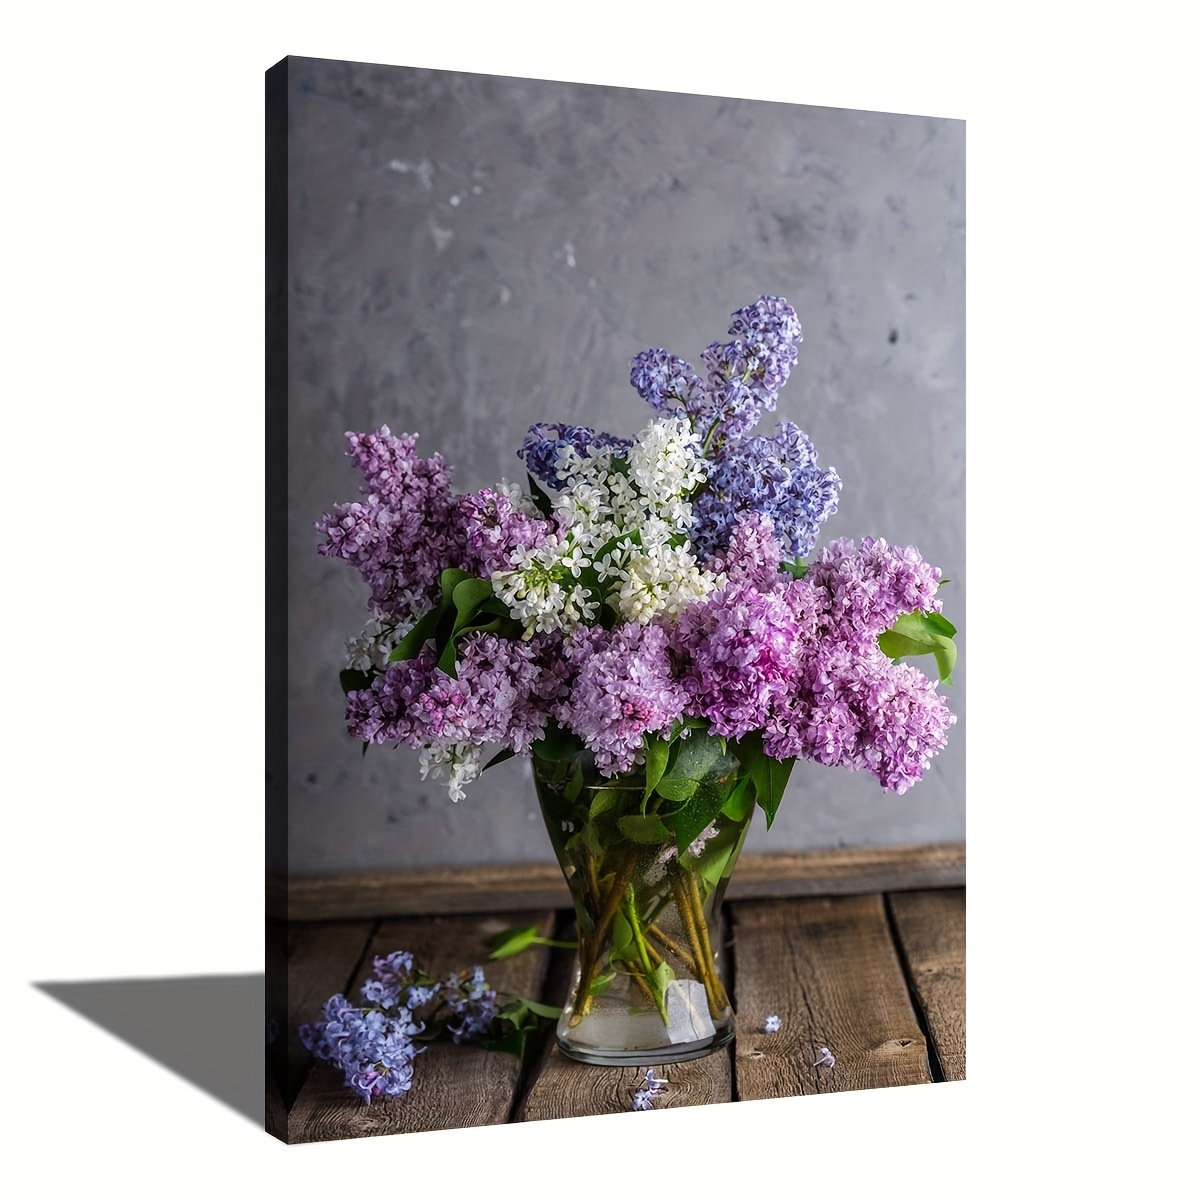 

Framed Painting Lilacs Bouquet Vase Canvas Posters And Prints Wall Art Pictures With Frame For Office, Living Room & Bedroom, Home Decoration, Festival Gift, Ready To Hang